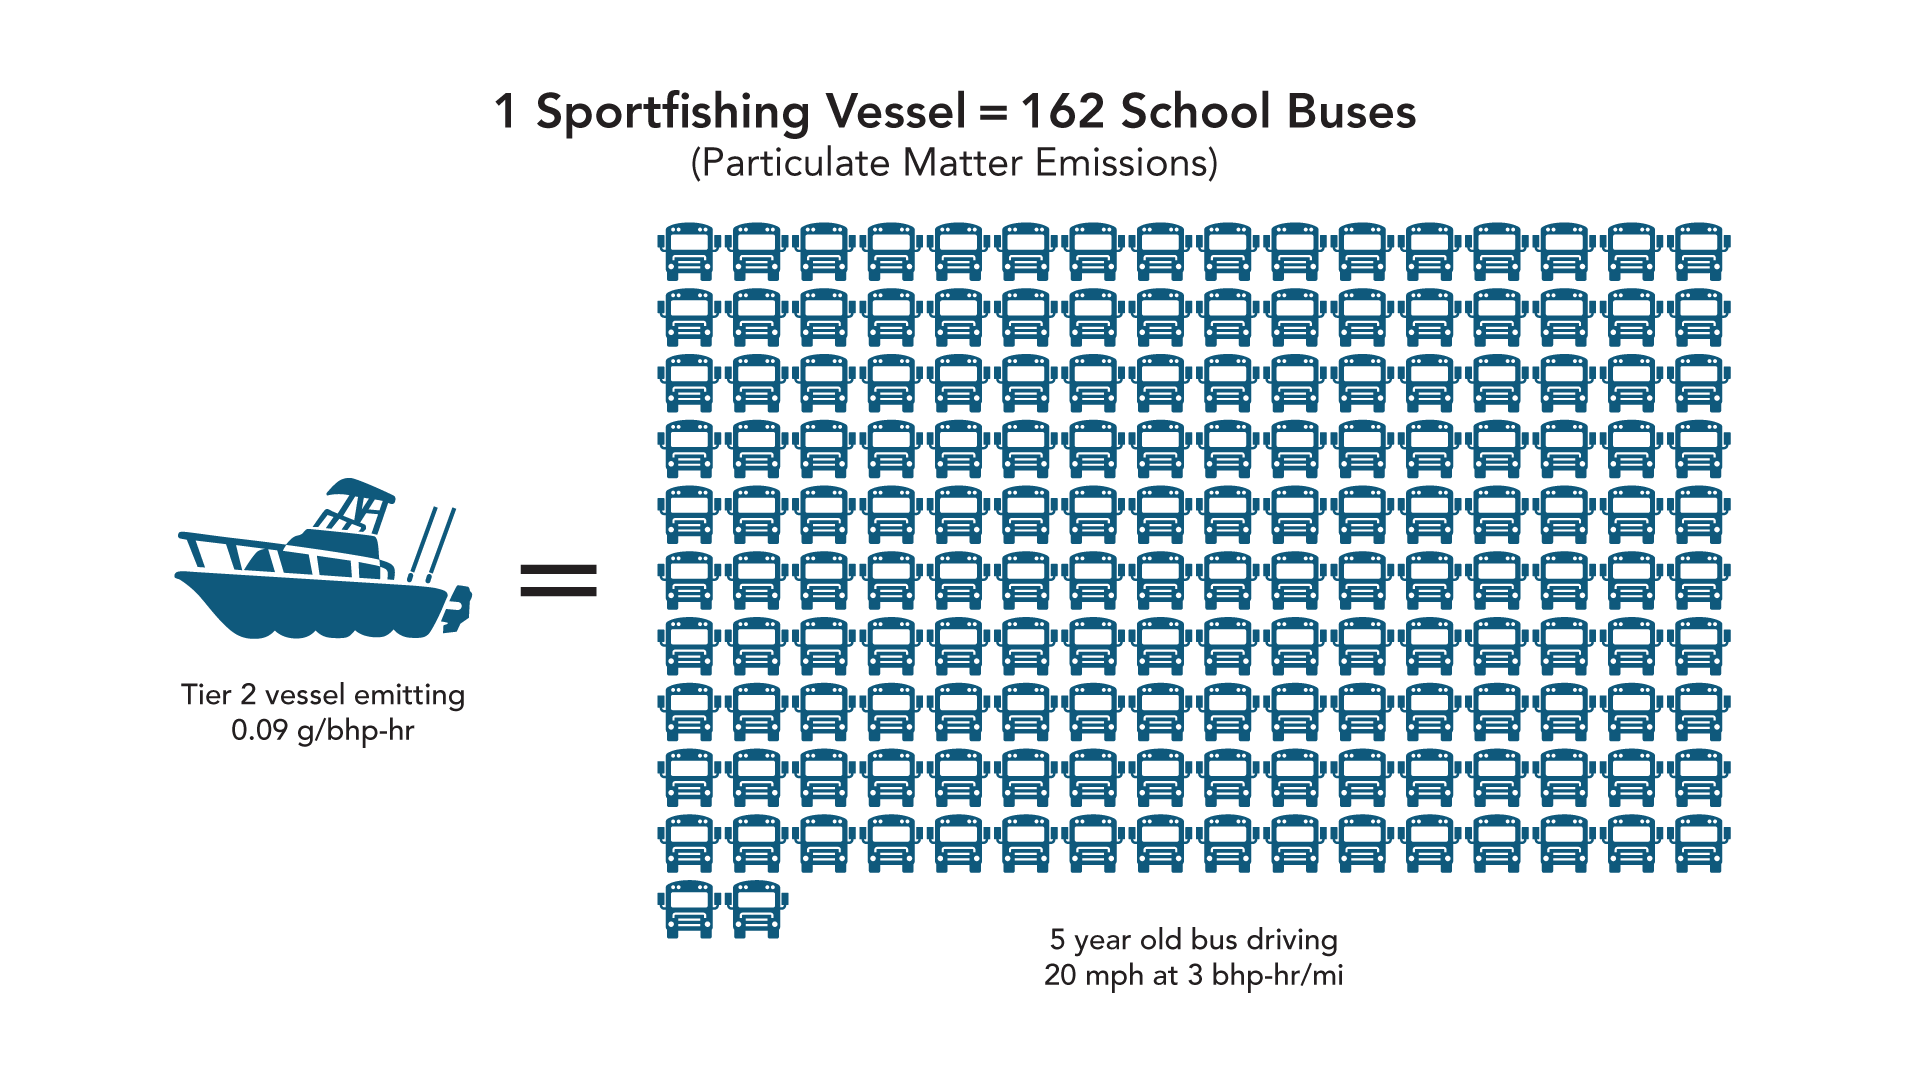 Image comparing emissions from 1 sportfishing vessel to 162 buses